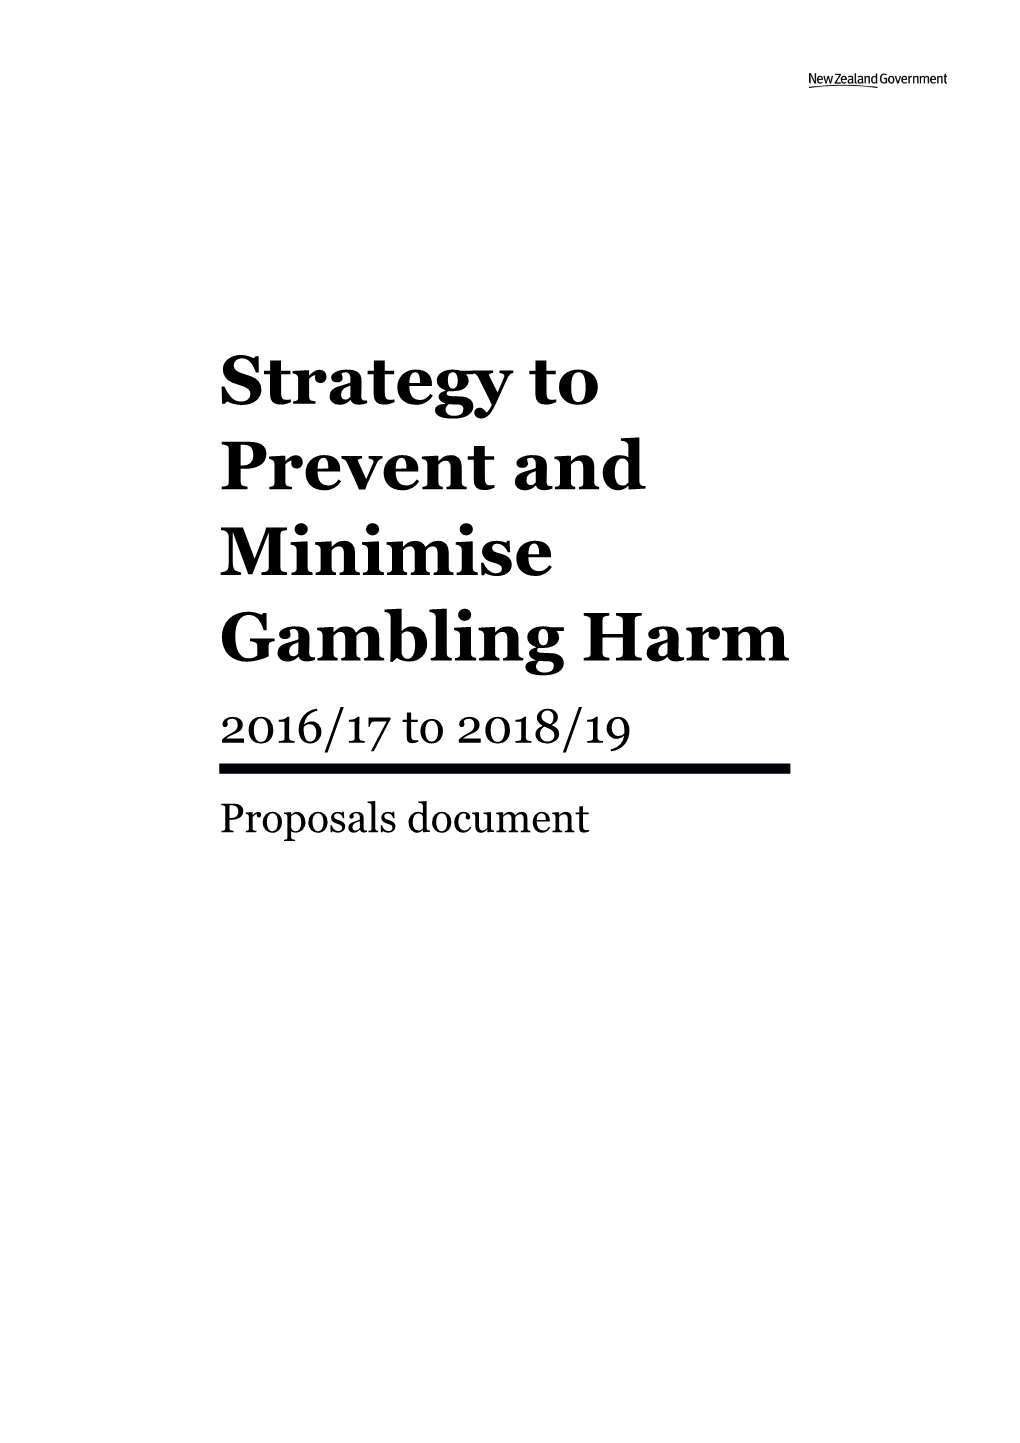 Strategy to Prevent and Minimise Gambling Harm 2016/17 to 2018/19: Consultation Document